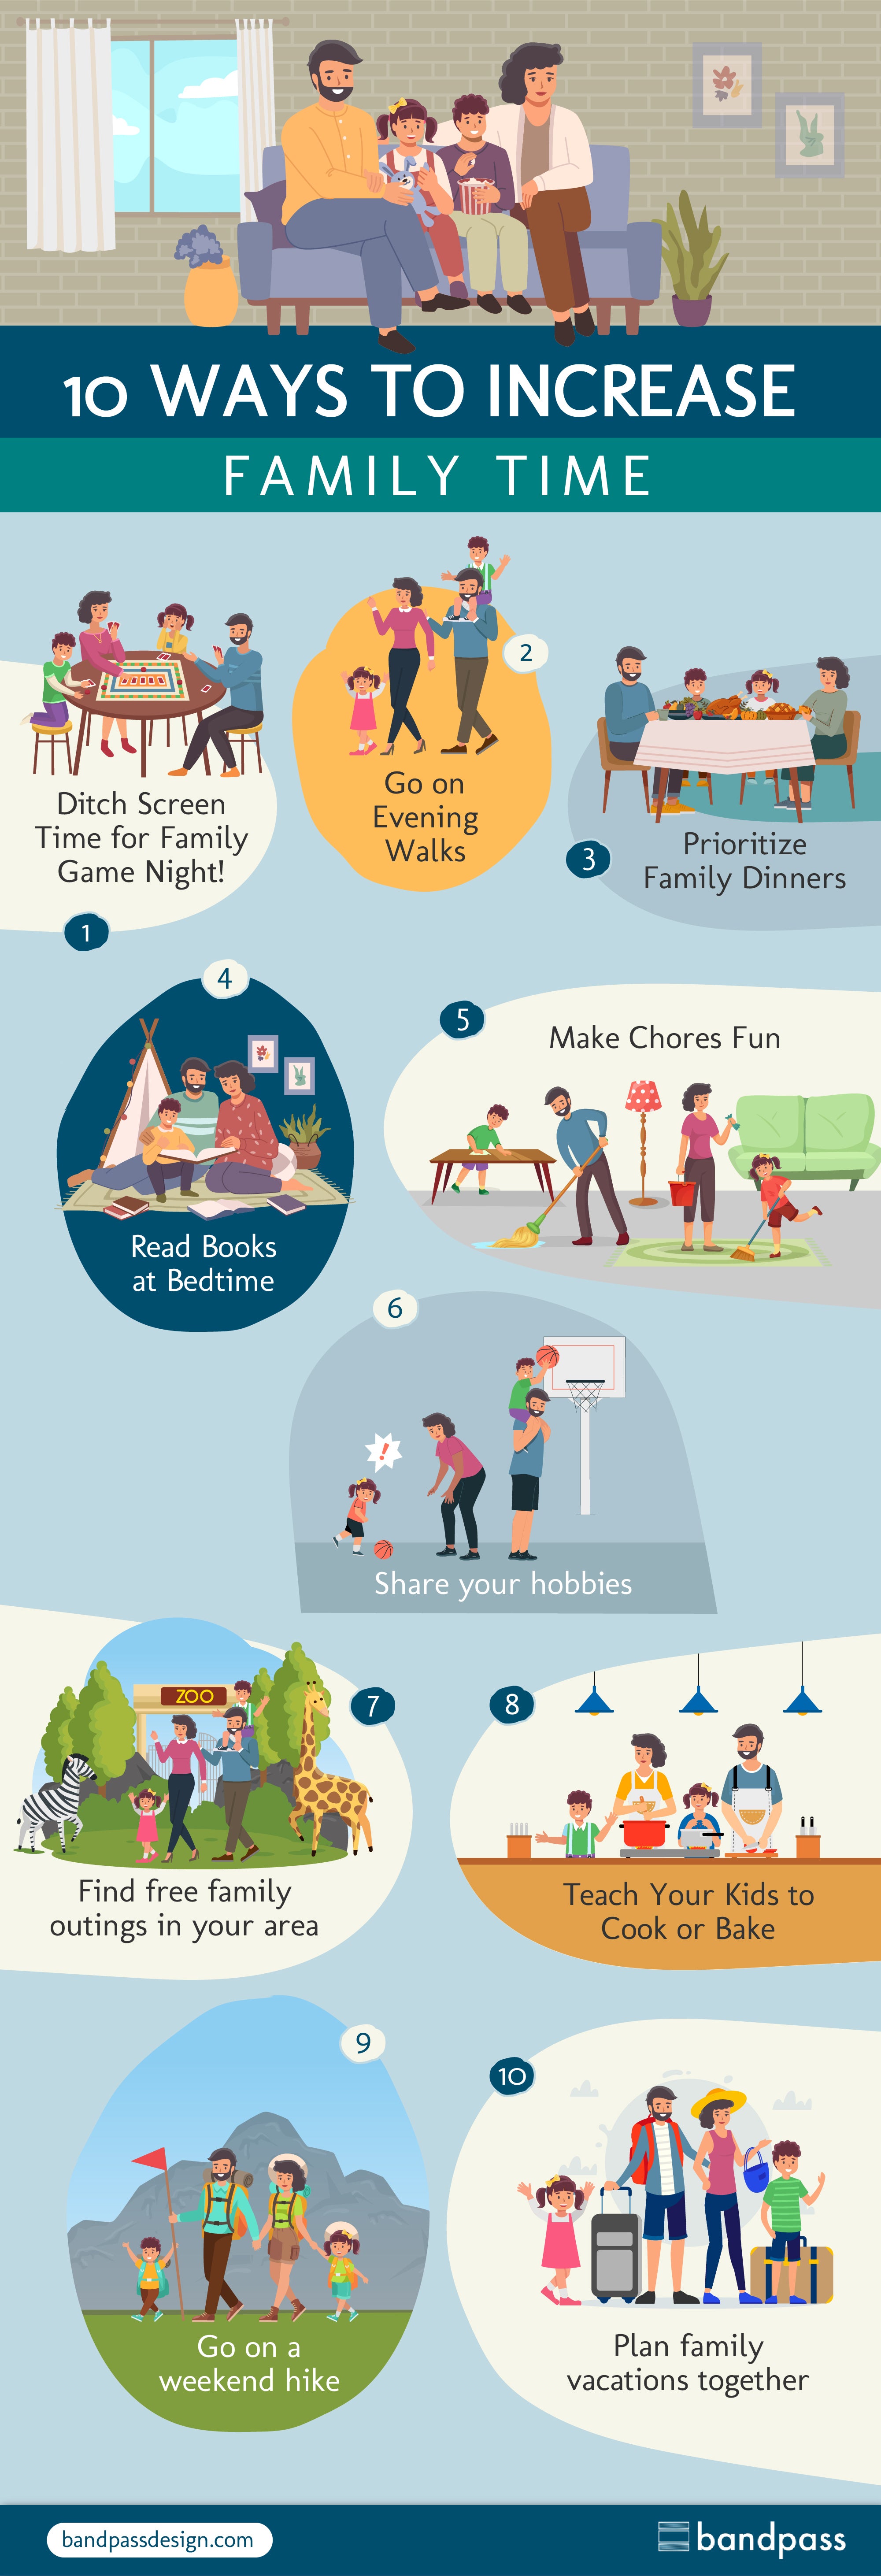 Ways to increase family time